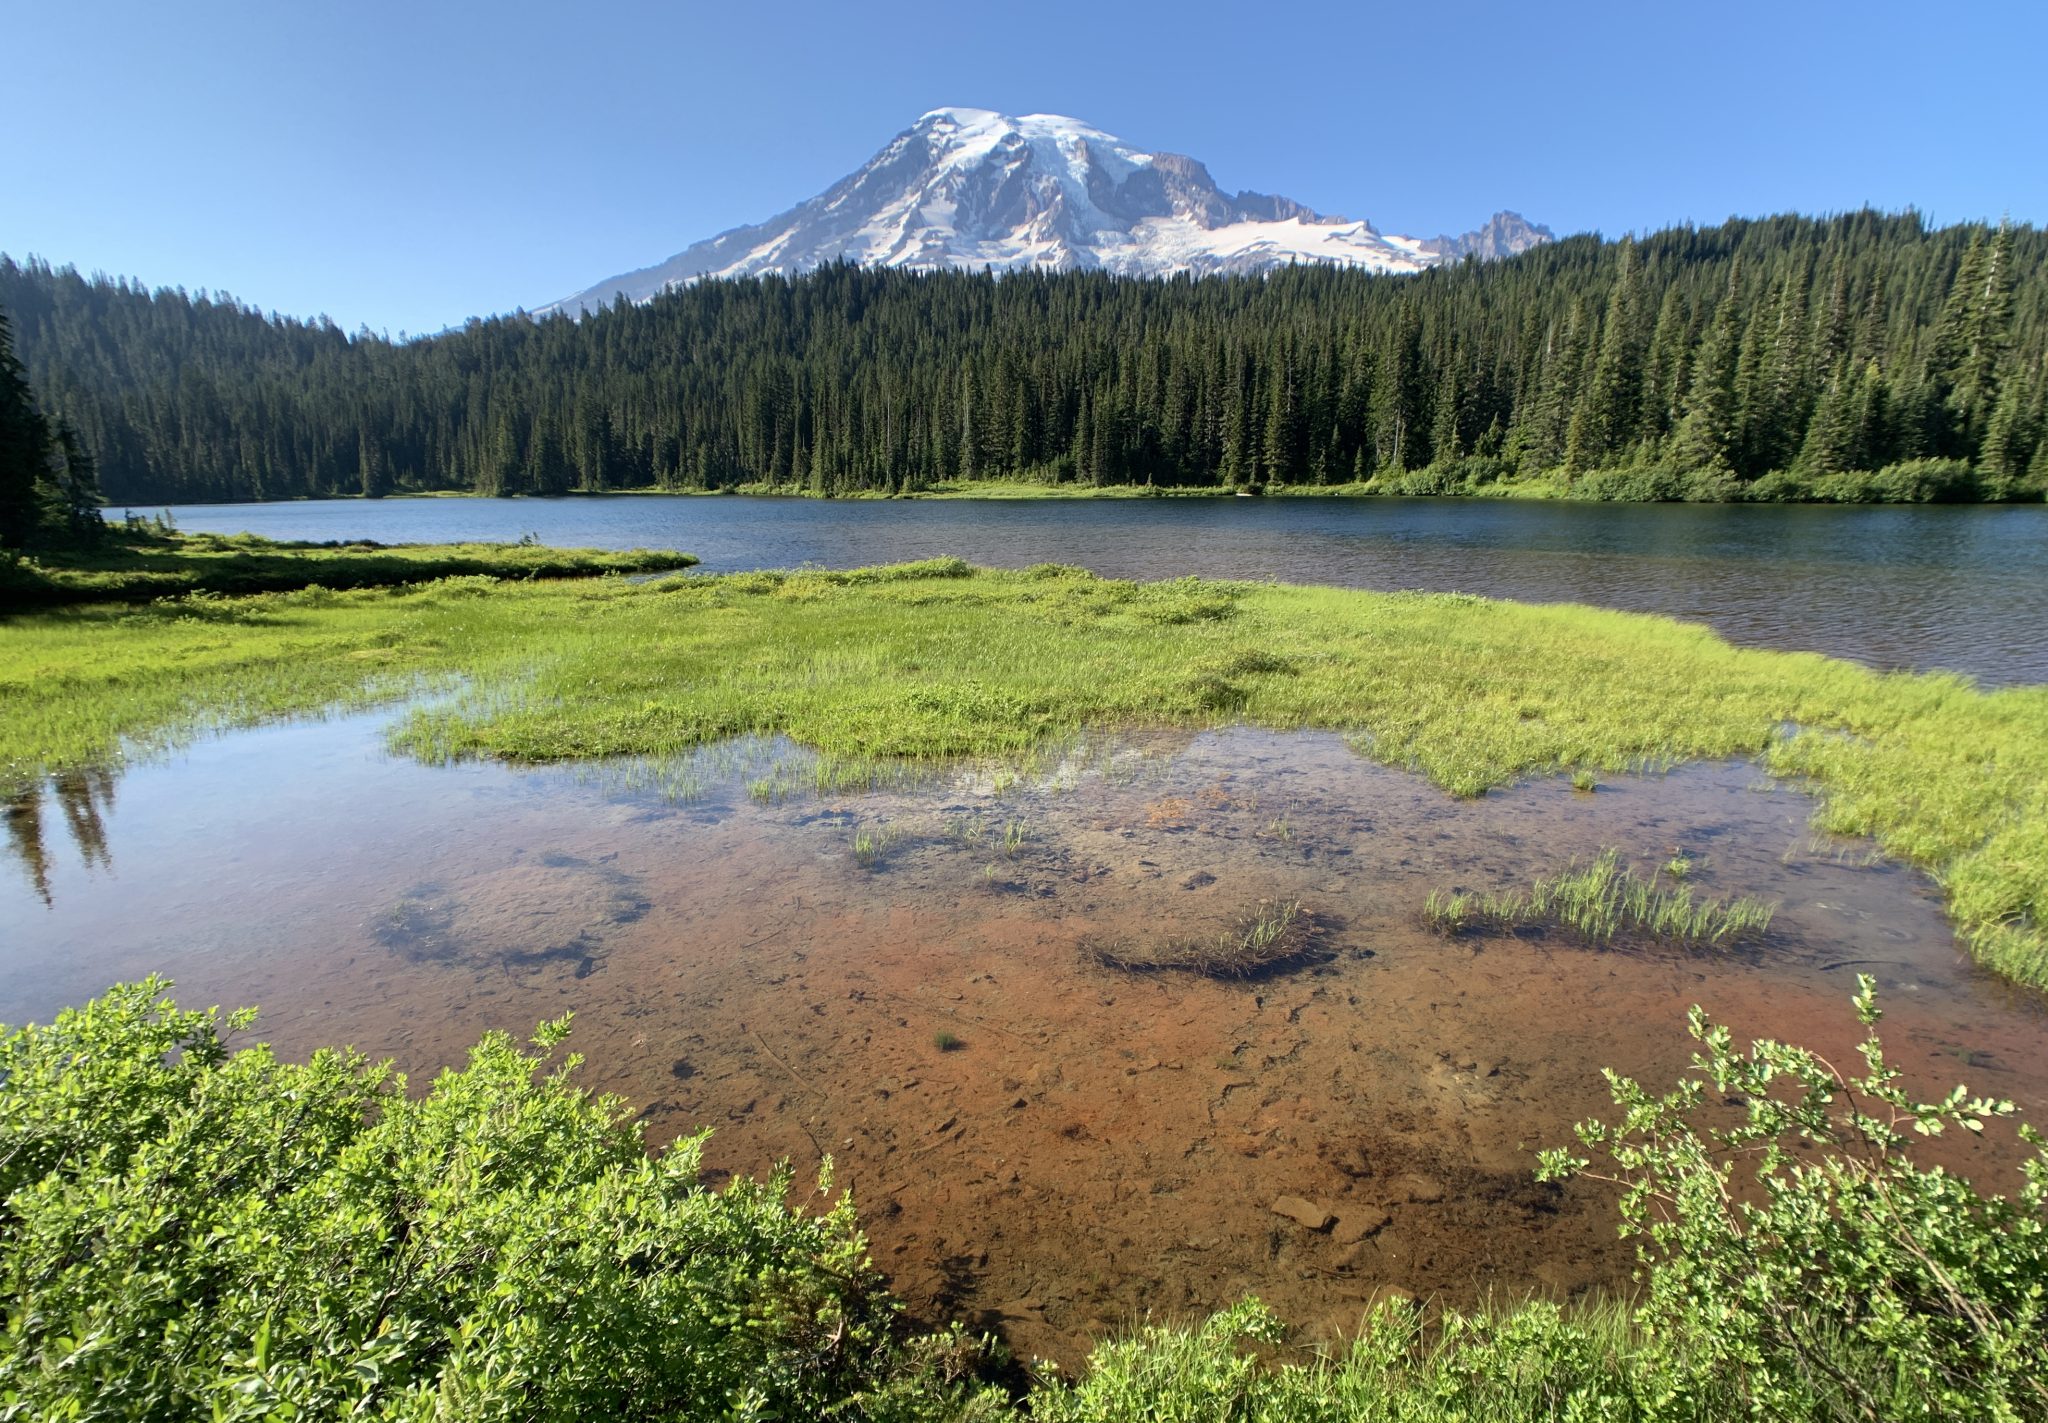 Meadow and Ponds With Mount Rainier In The Background